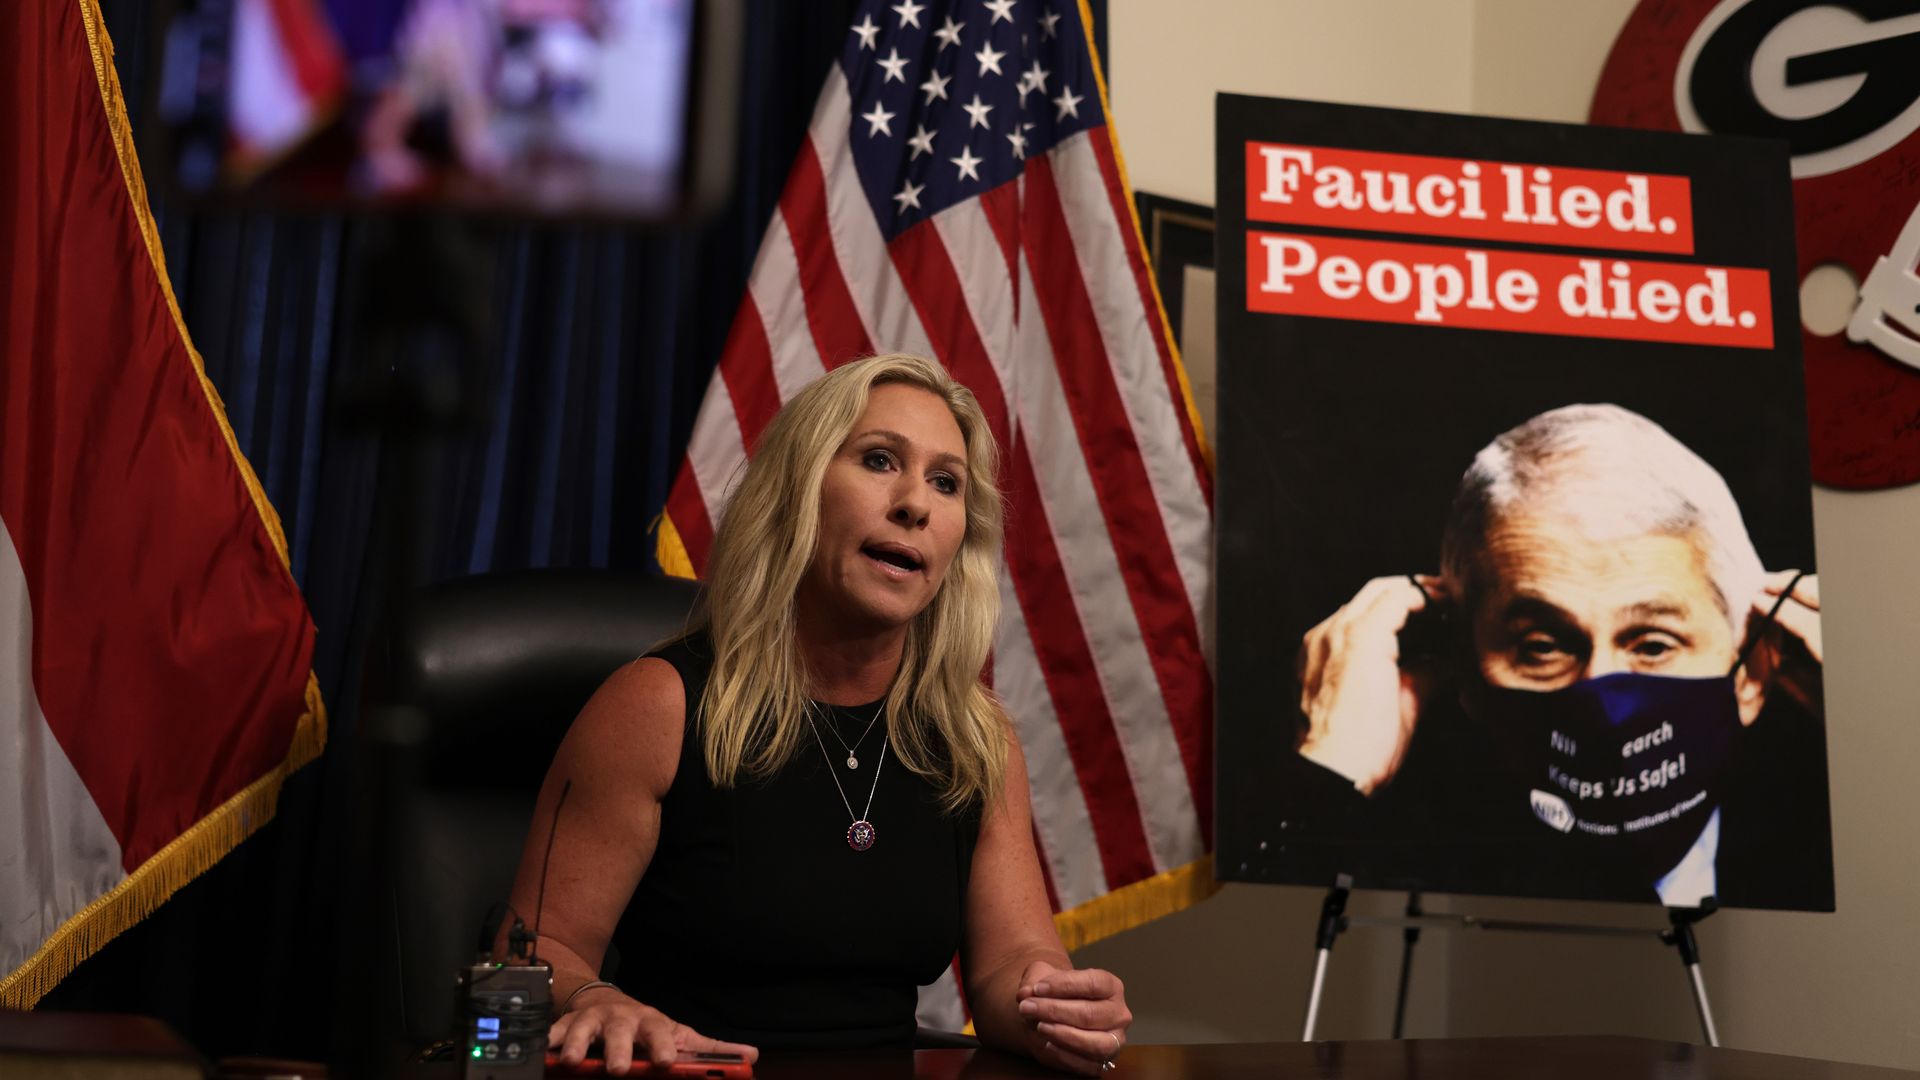 Marjorie Taylor Greene at a press conference in front of a "Fauci lied" poster